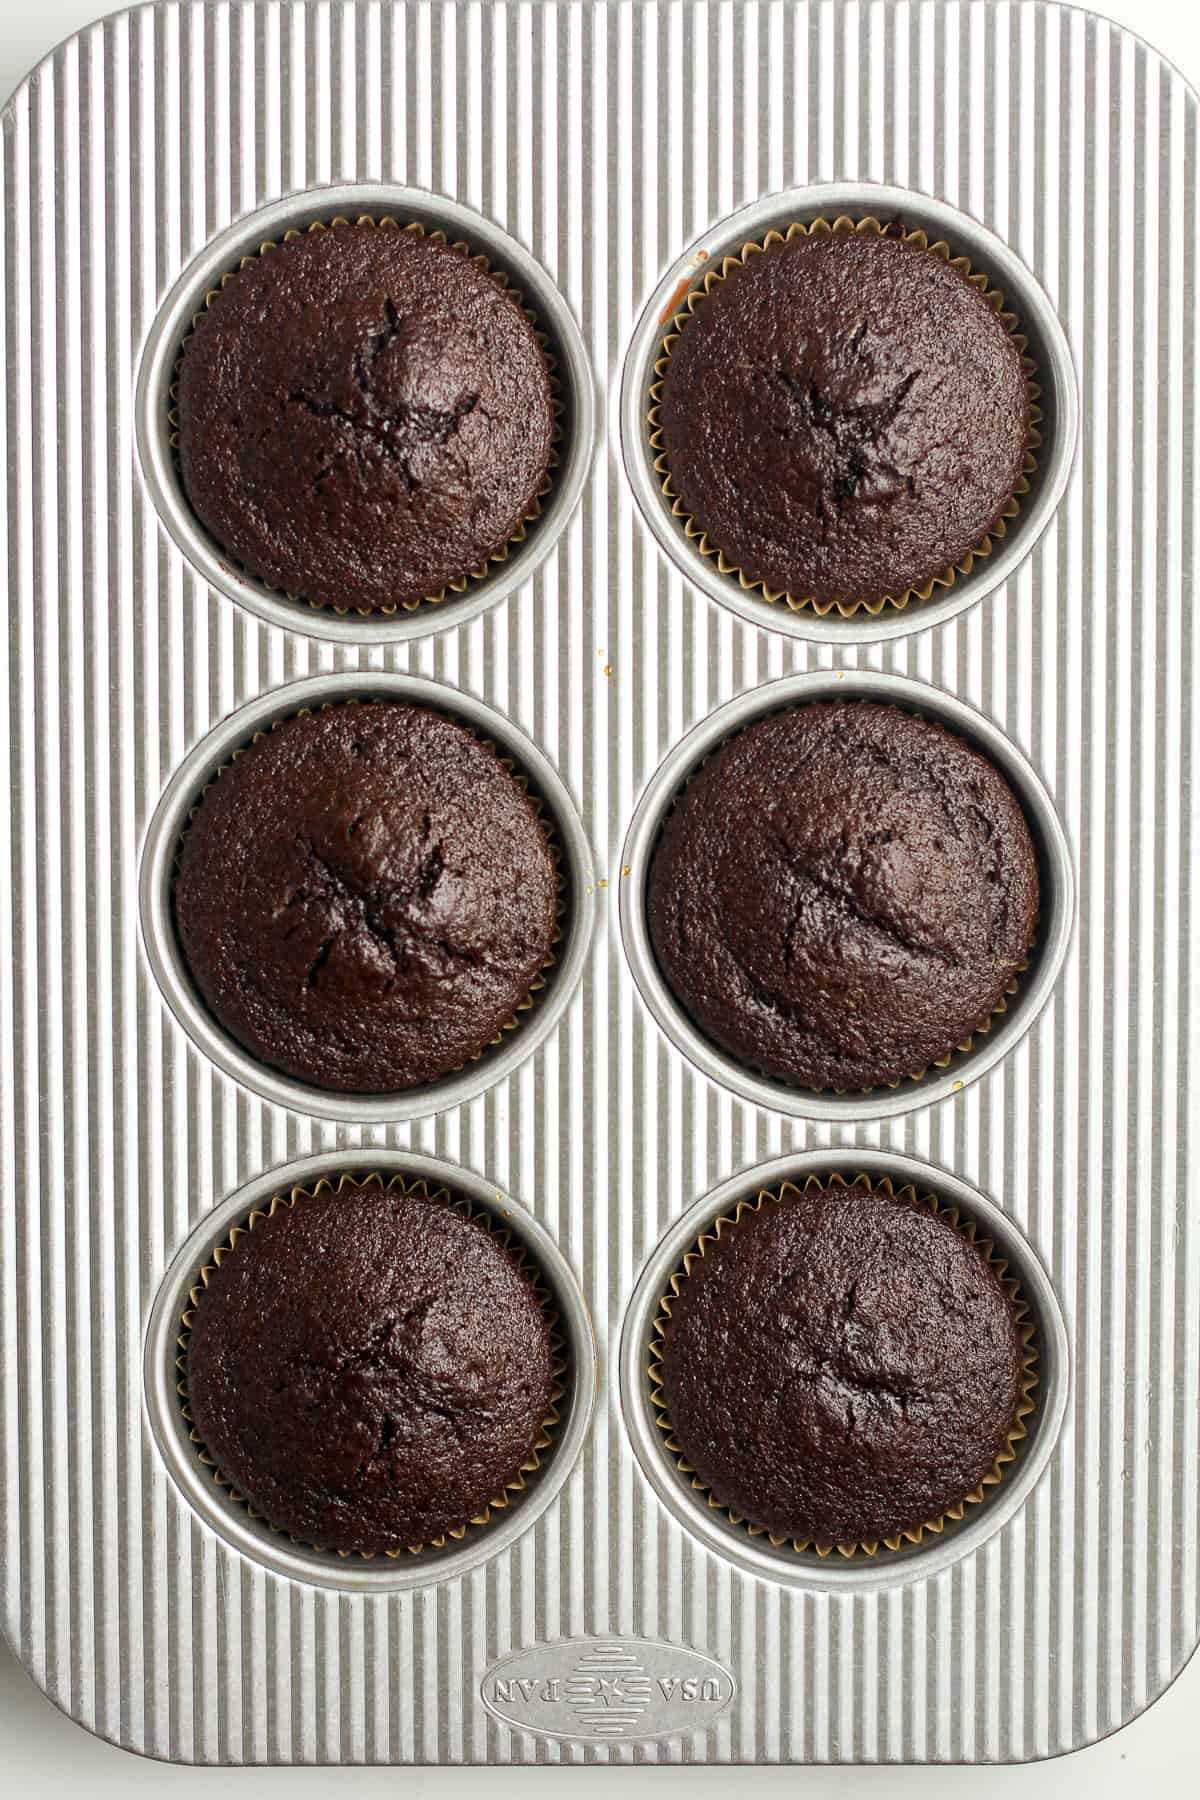 The just baked cupcakes in the jumbo muffin tins.